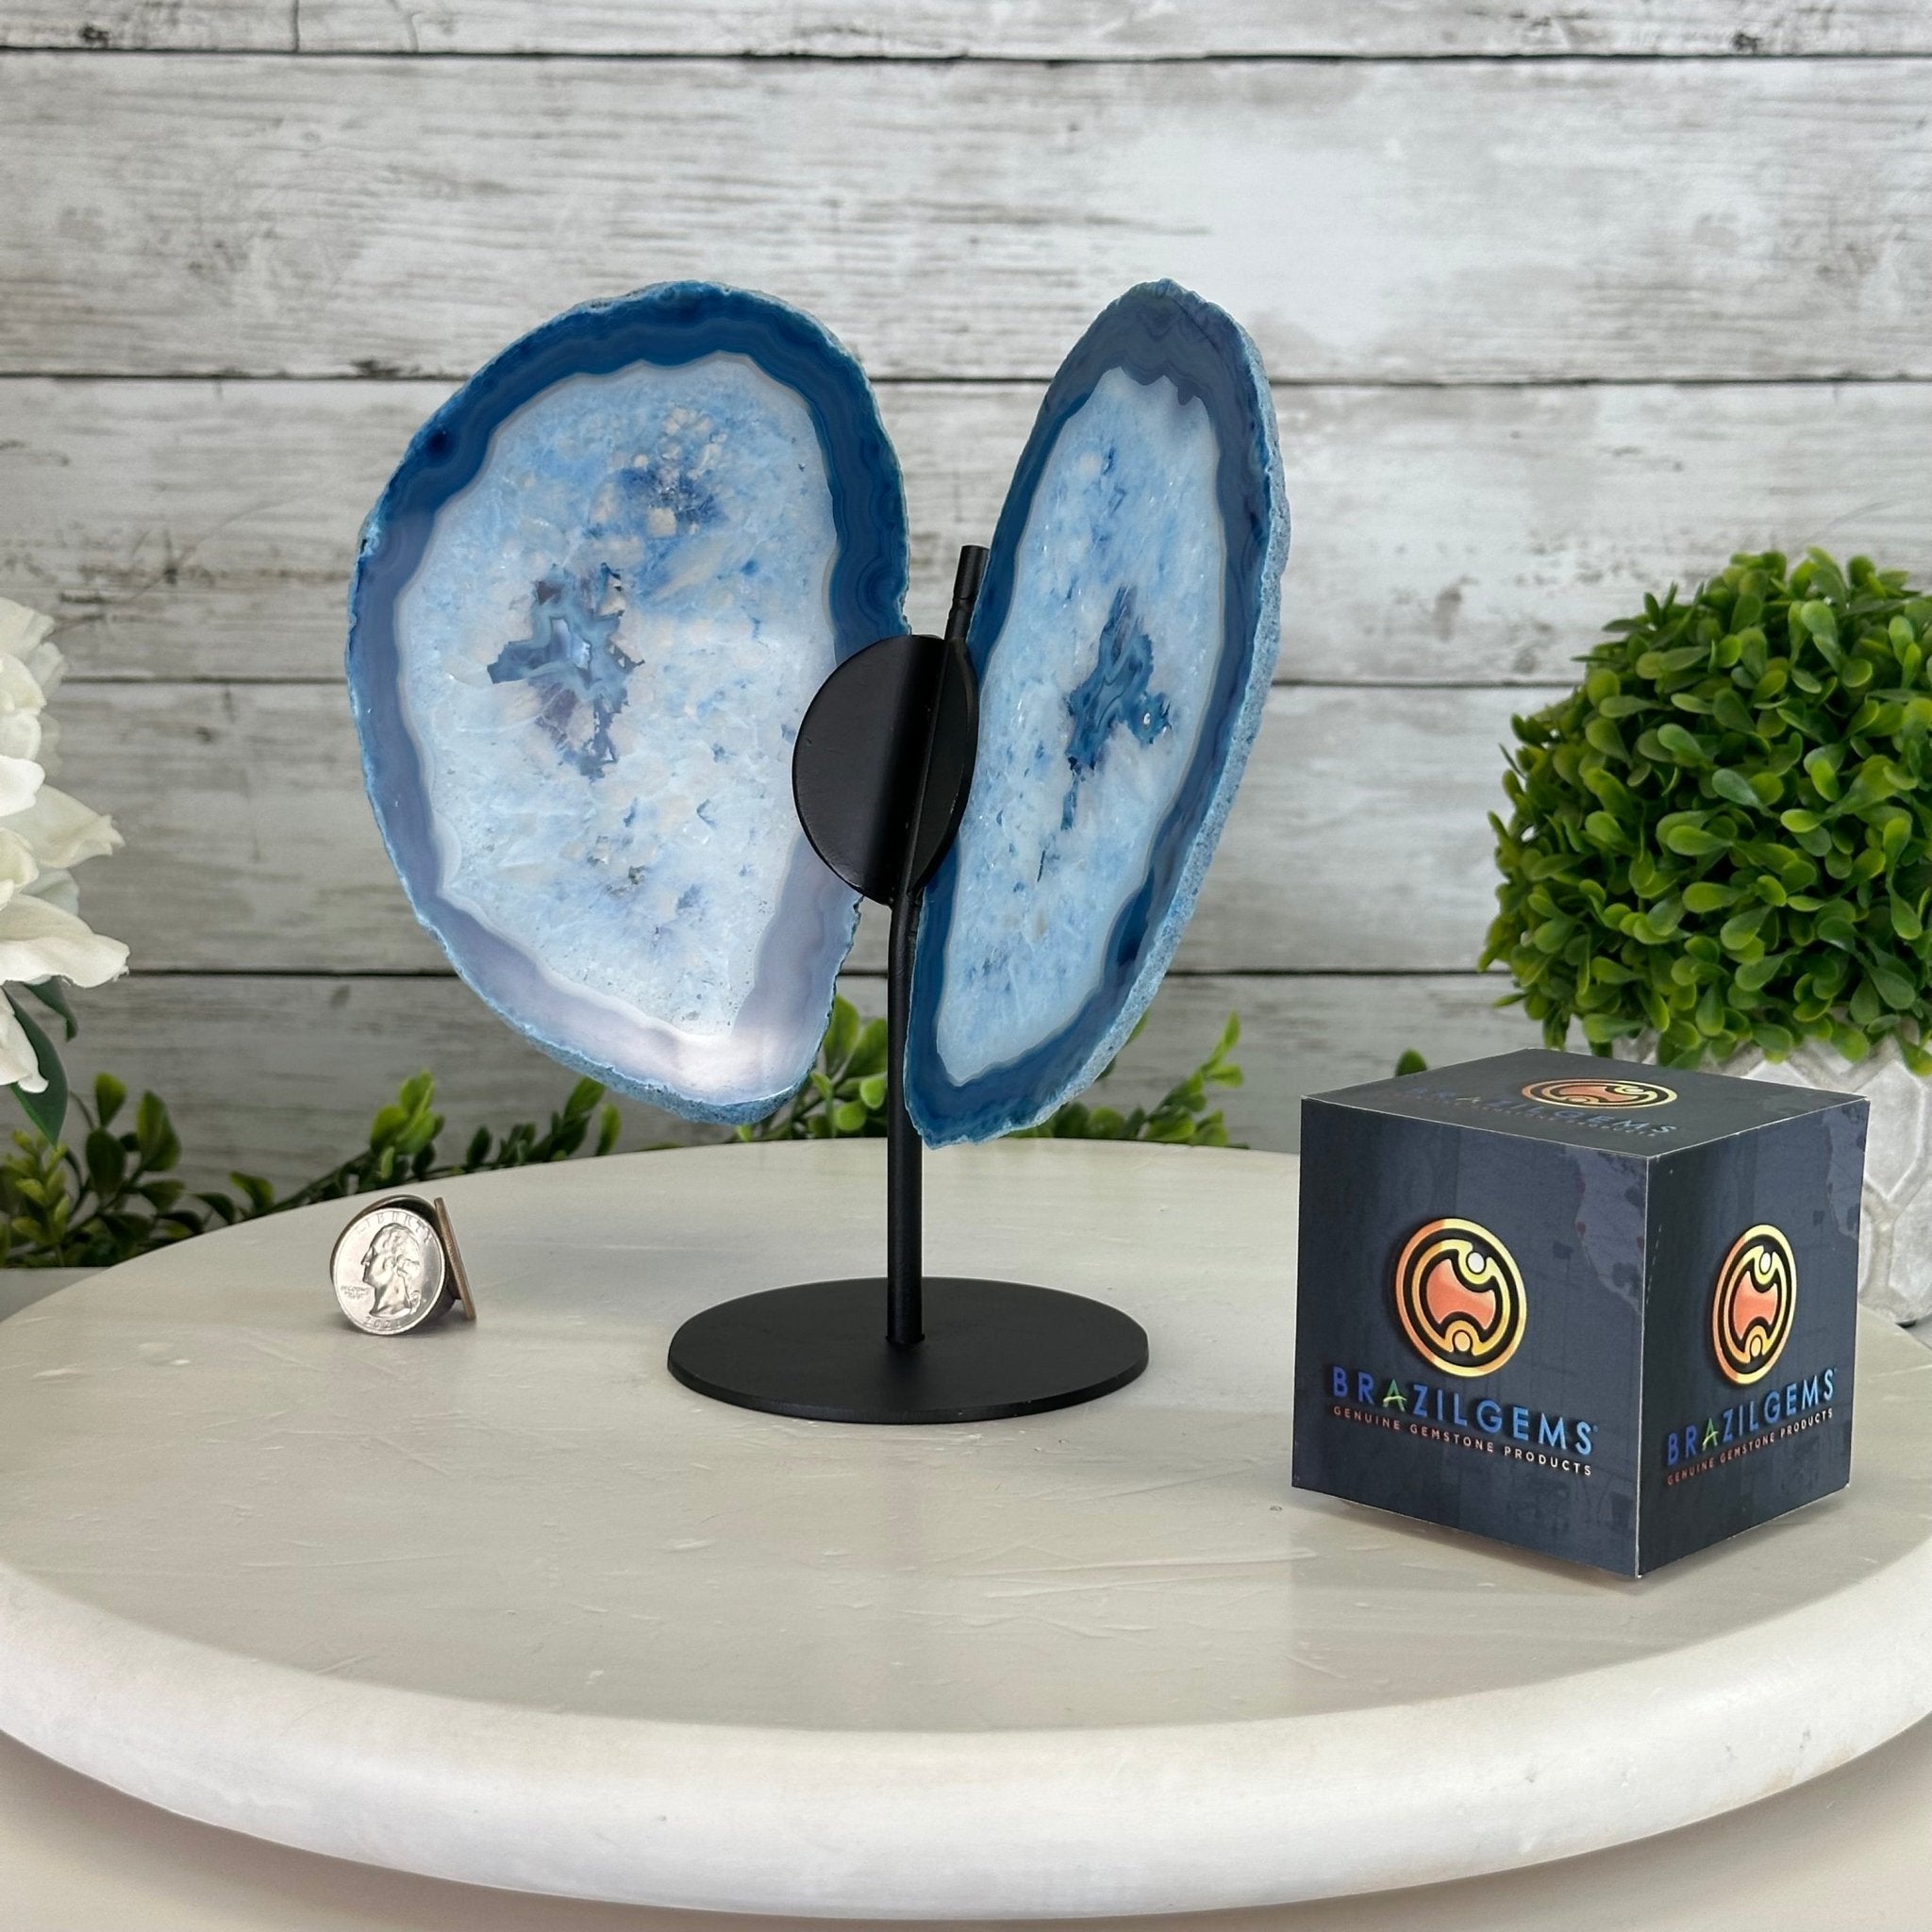 Blue Agate "Butterfly Wings" on stand, 7.5" Tall #5050BL-068 - Brazil GemsBrazil GemsBlue Agate "Butterfly Wings" on stand, 7.5" Tall #5050BL-068Agate Butterfly Wings5050BL-068